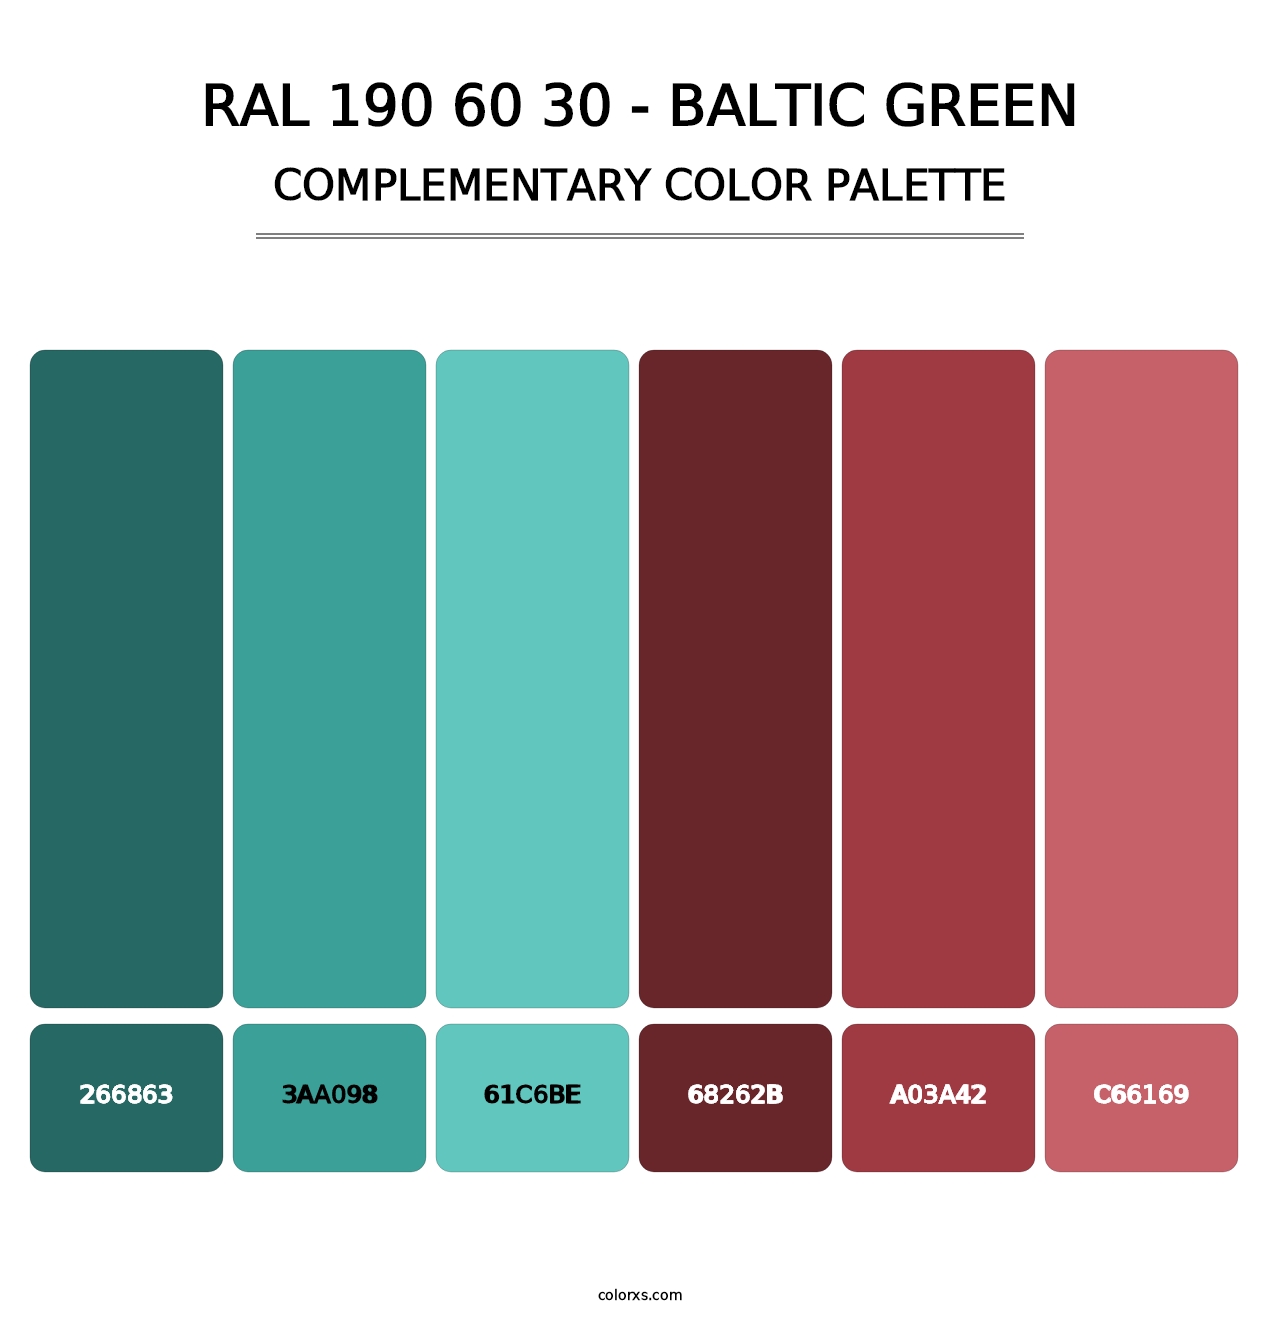 RAL 190 60 30 - Baltic Green - Complementary Color Palette